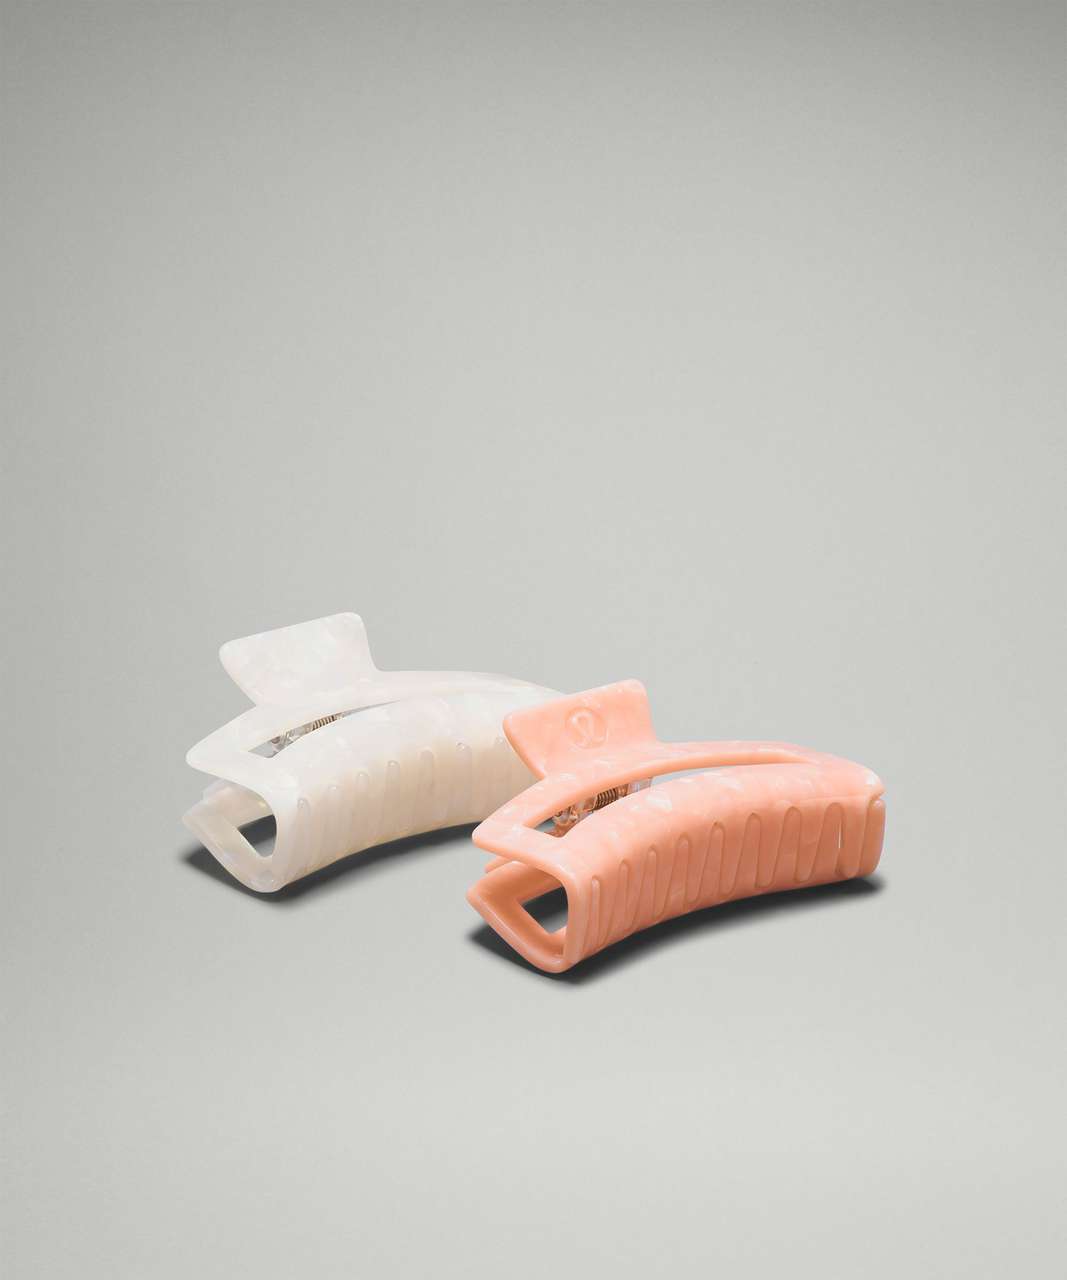 Lululemon Large Claw Hair Clips *2 Pack - White Opal / Silverstone / Flush Pink / Pink Puff